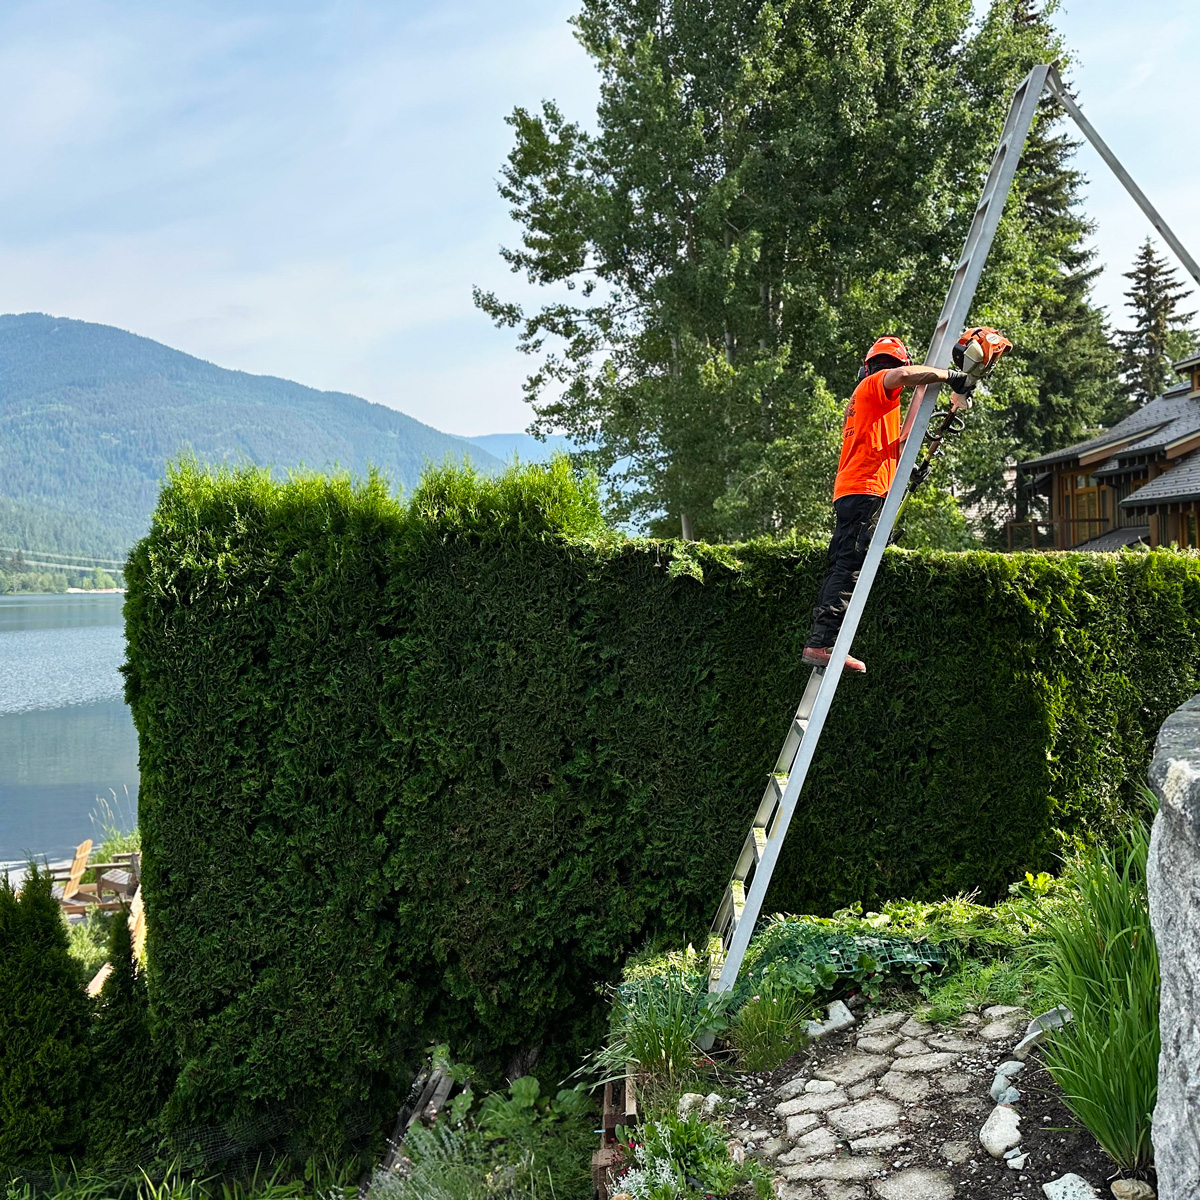 Garibaldi Tree employee trimming a hedge in Whistler, BC, beside a lake. It's a beautiful sunny day with blue skies.